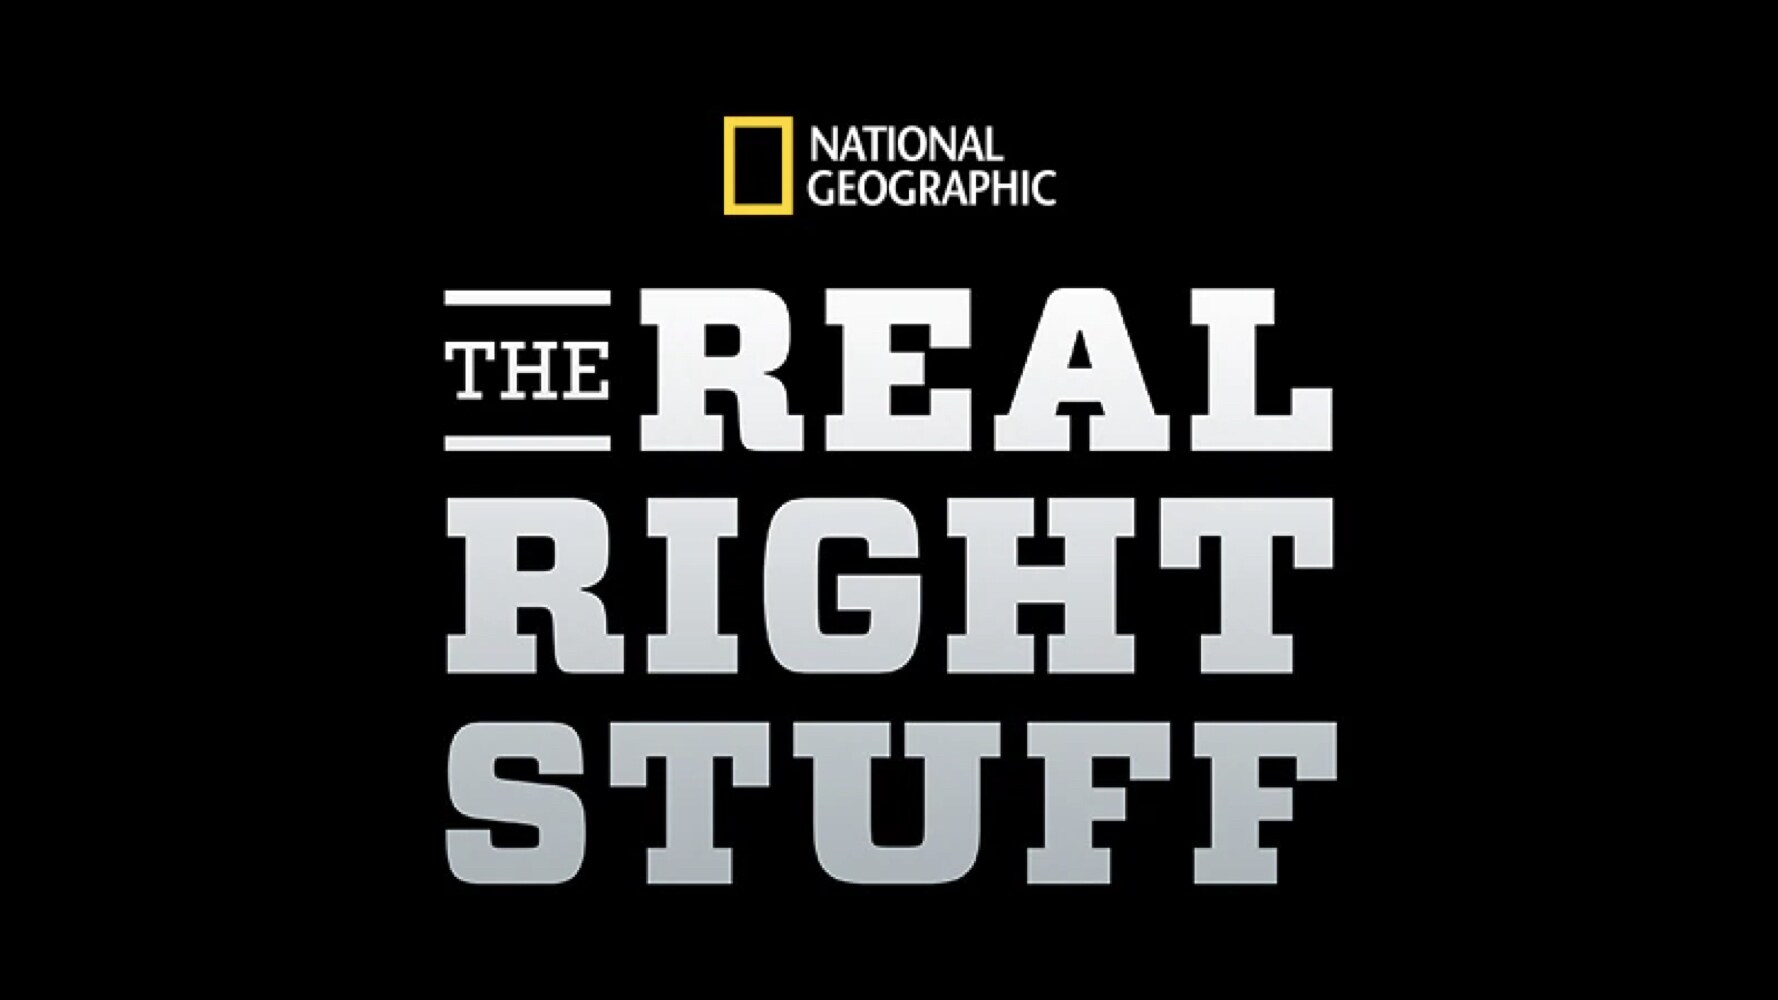 Disney+ To Premiere Documentary Special ‘The Real Right Stuff,’ From National Geographic, On Friday, Nov. 20